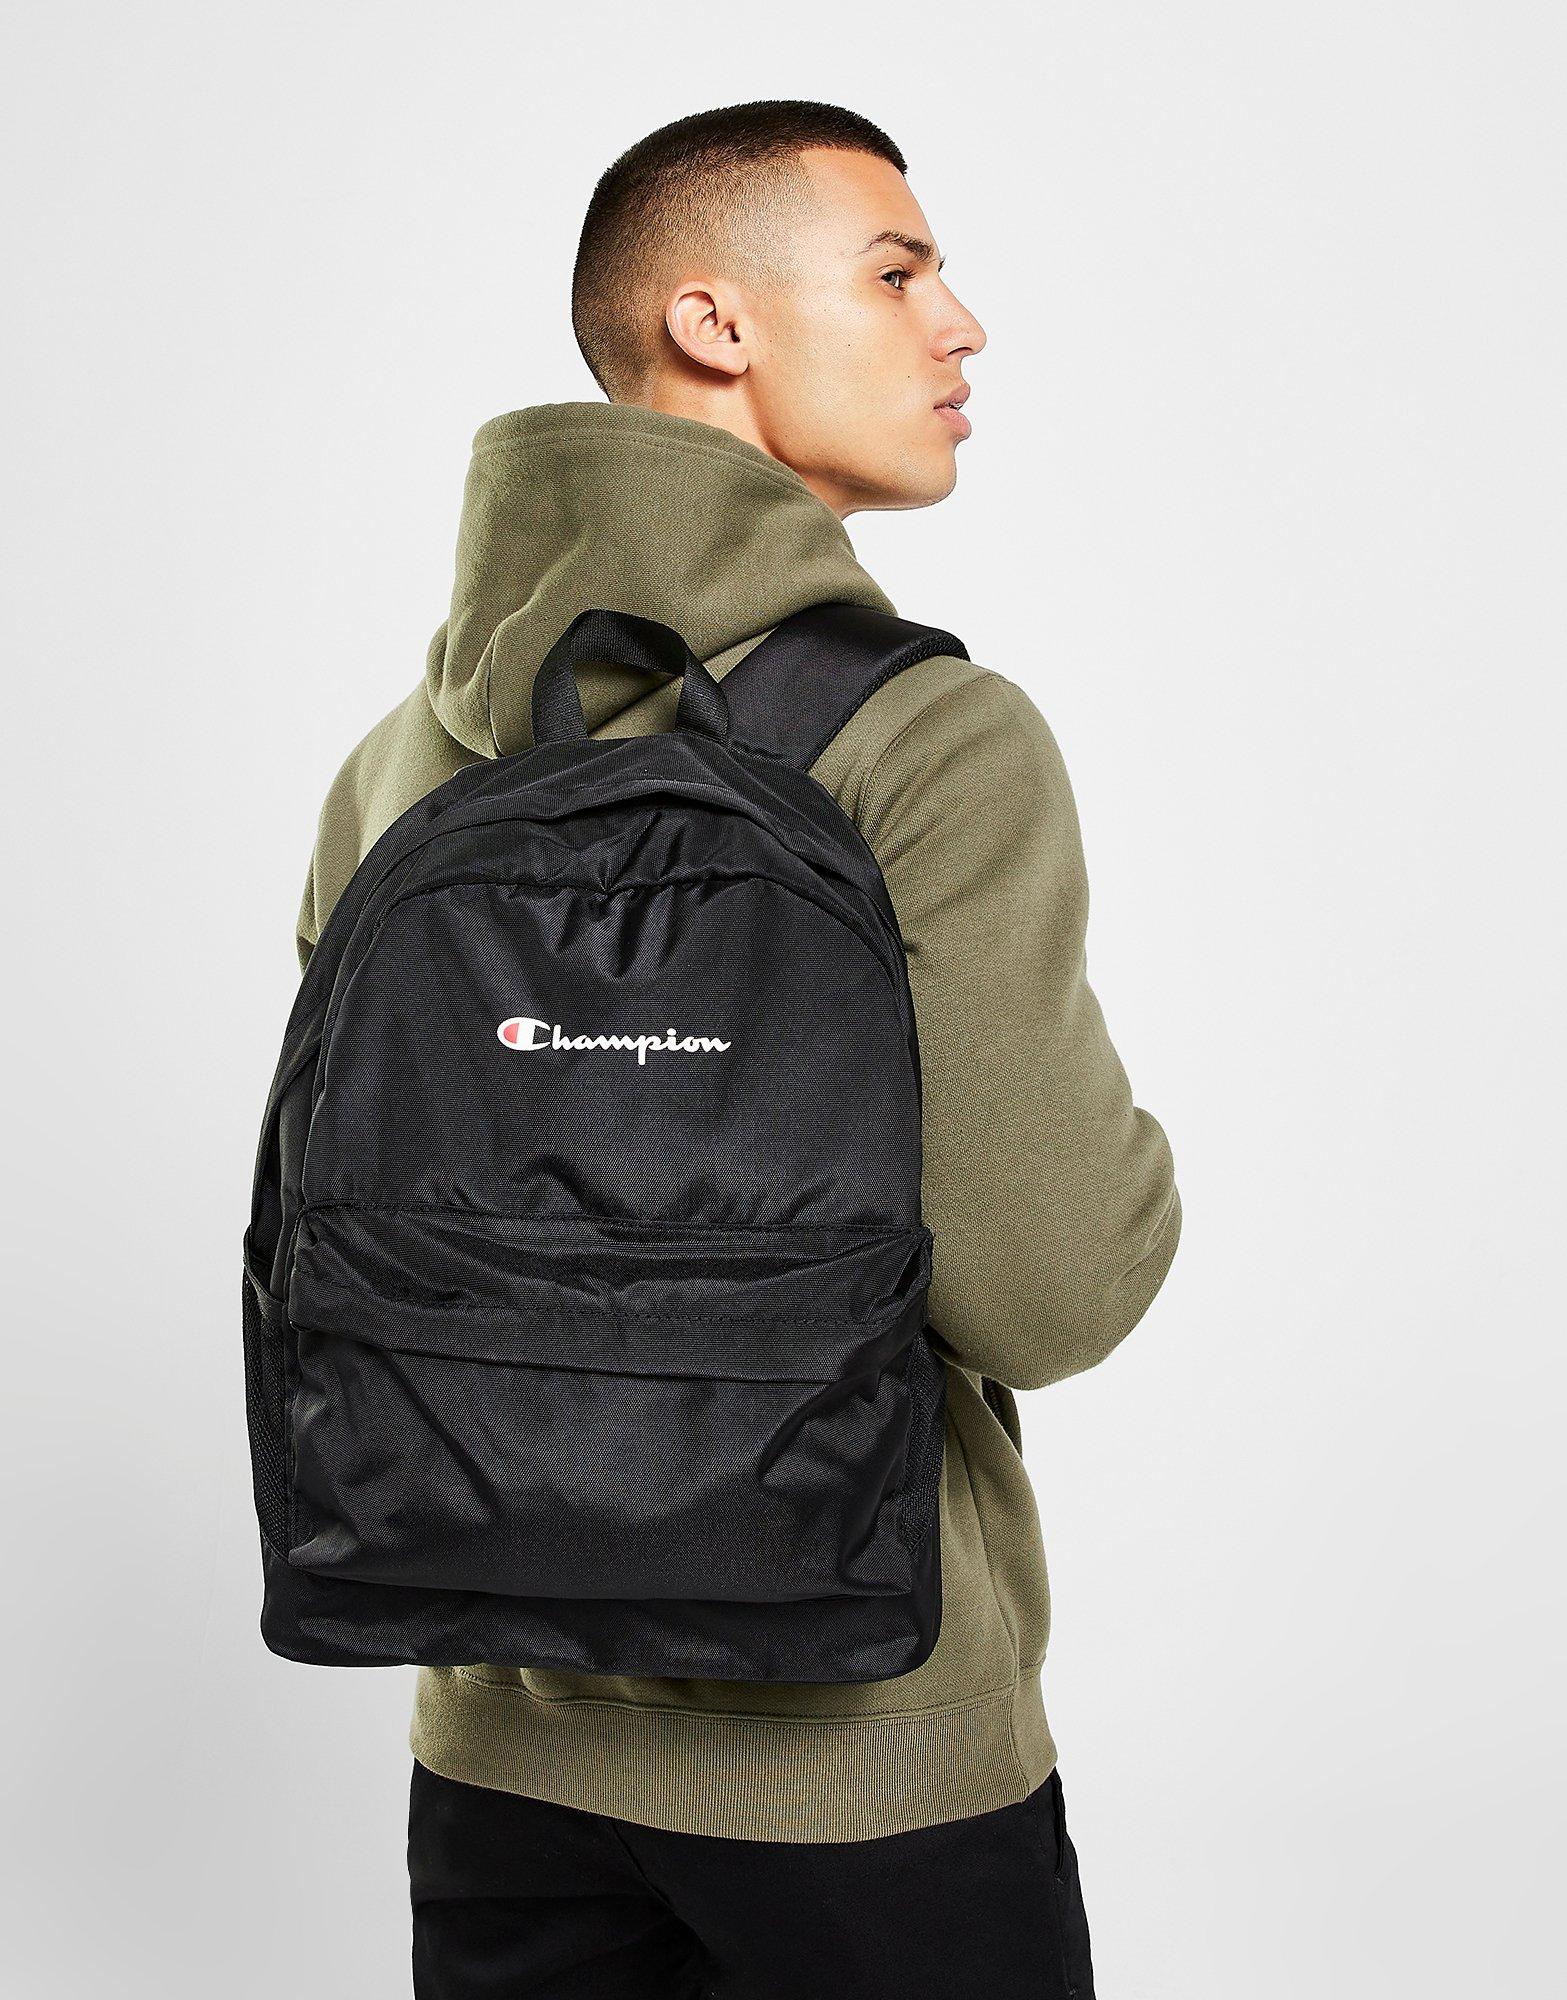 converse backpack jd